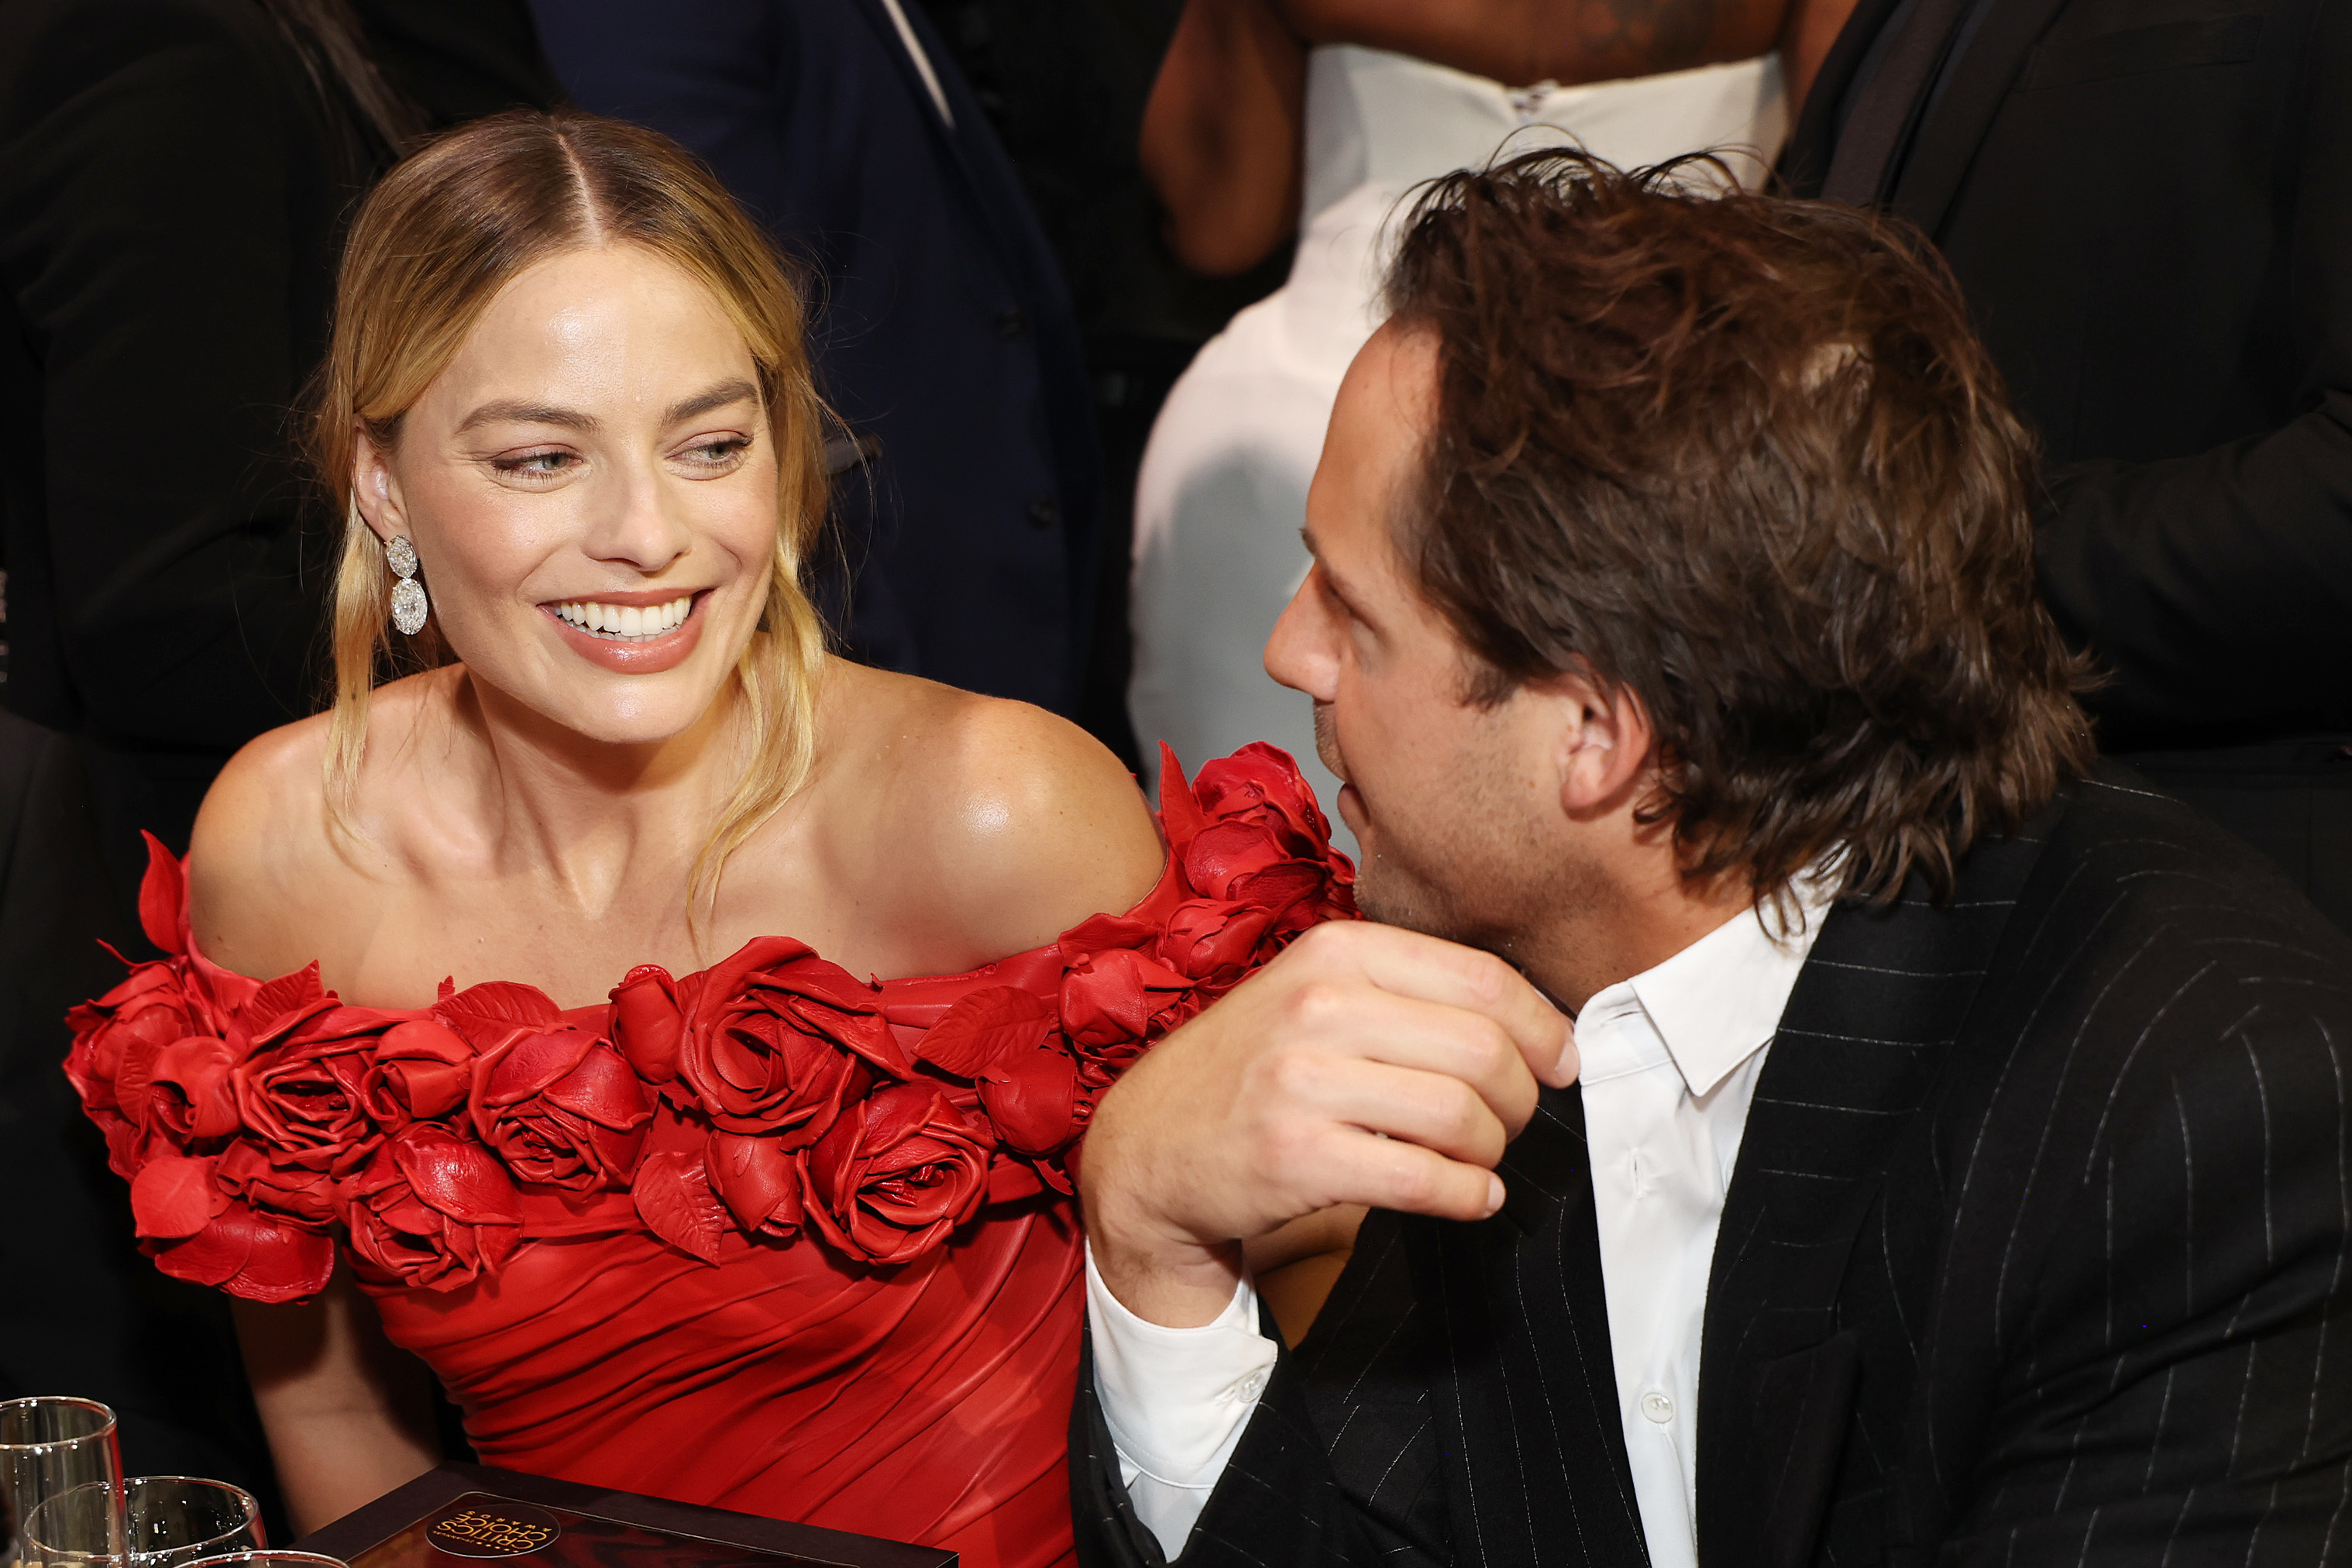 Margot Robbie in a floral off-the-shoulder dress smiles at a man in a striped suit at an event